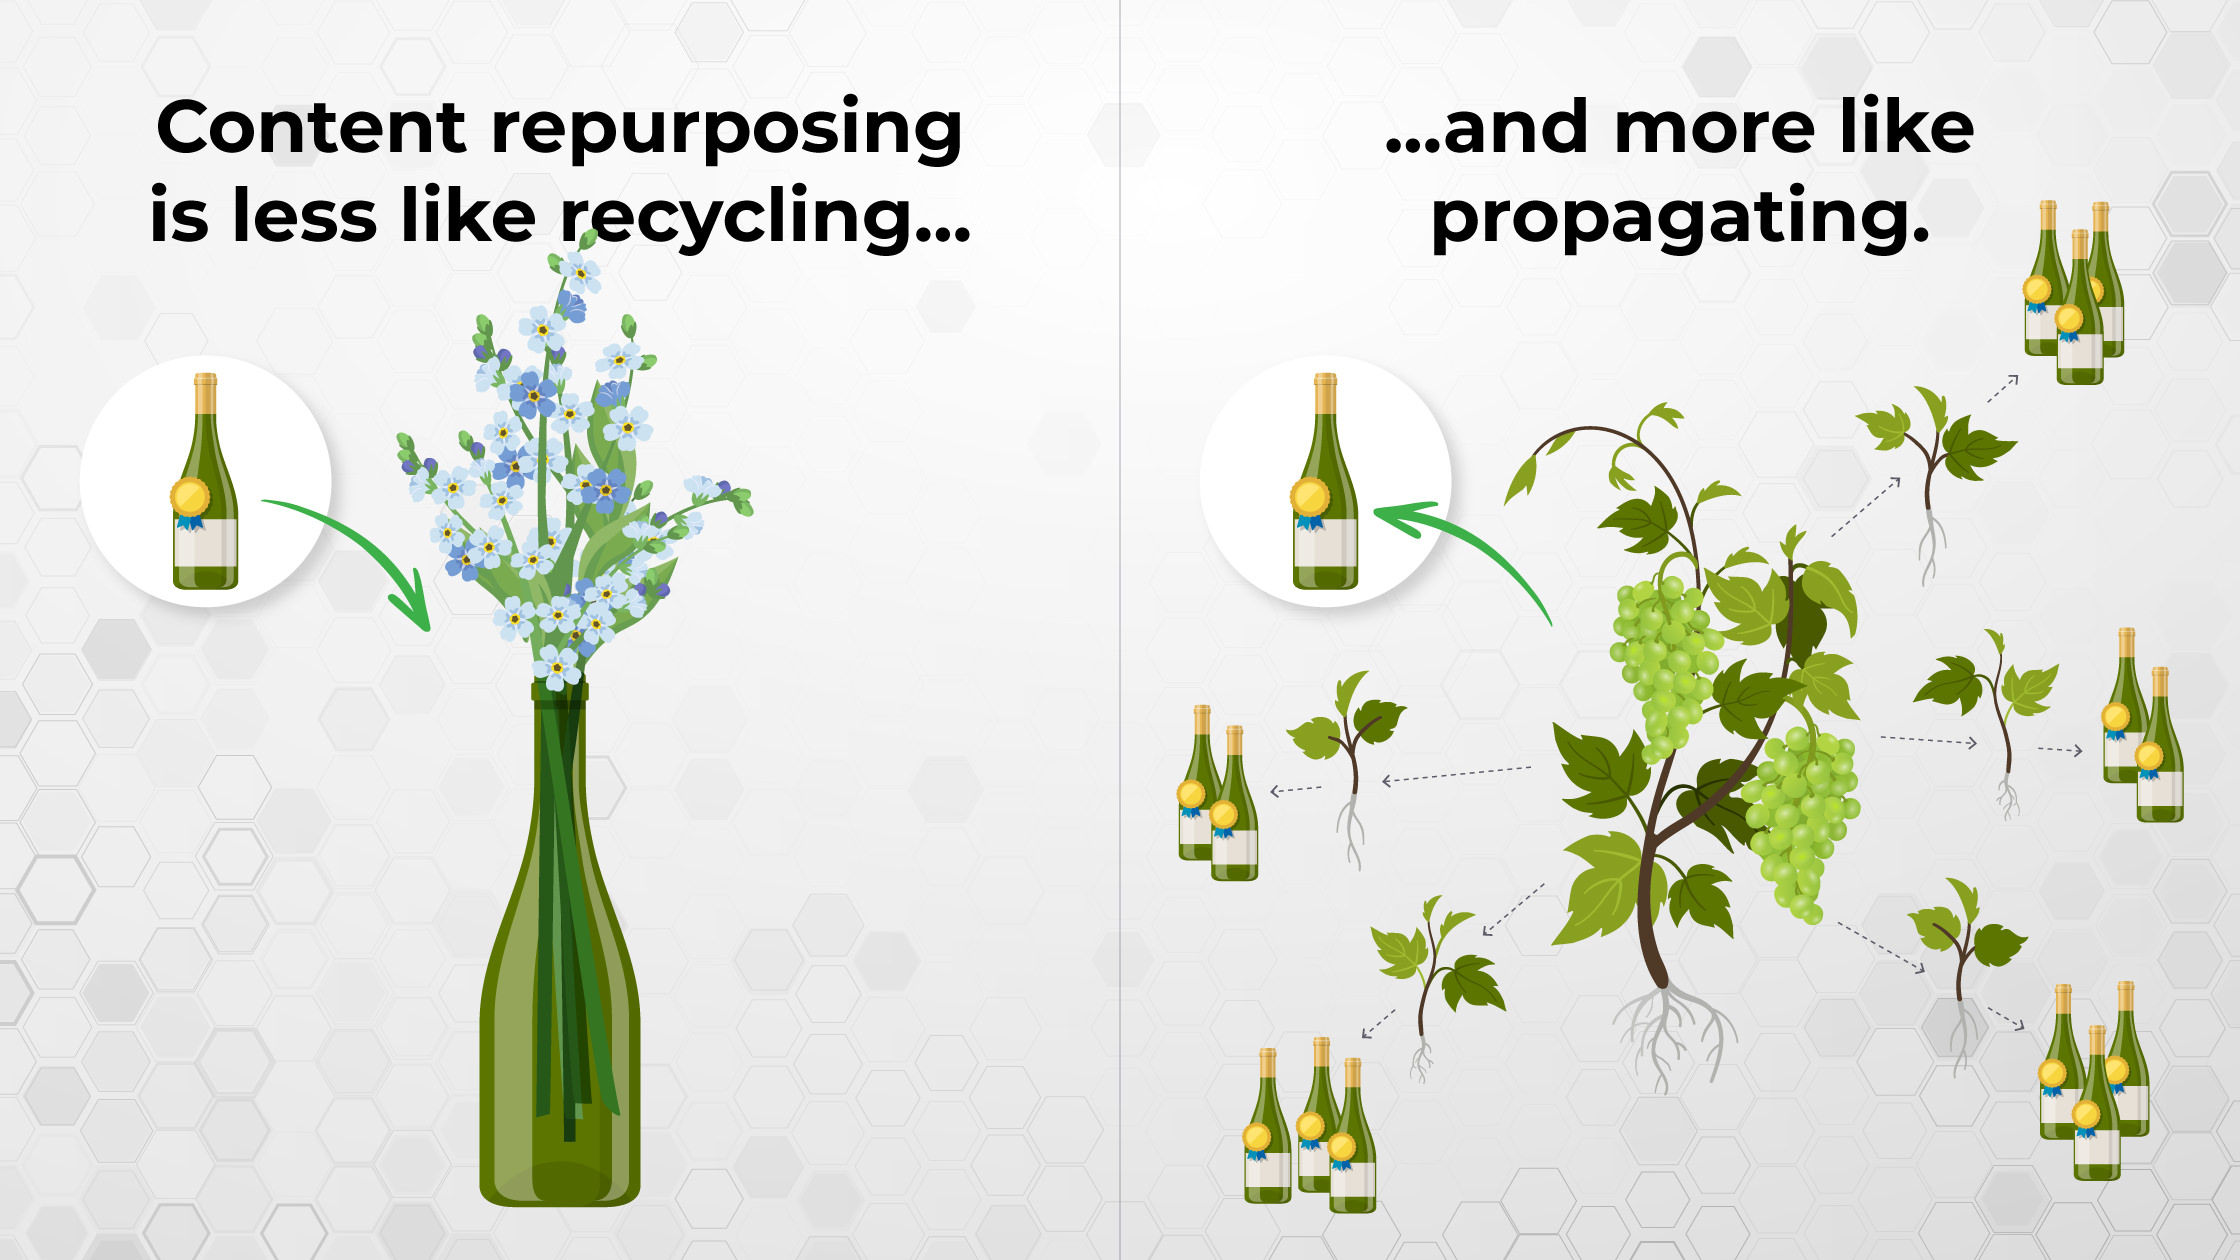 Content repurposing is less like recycling and more like propagating.